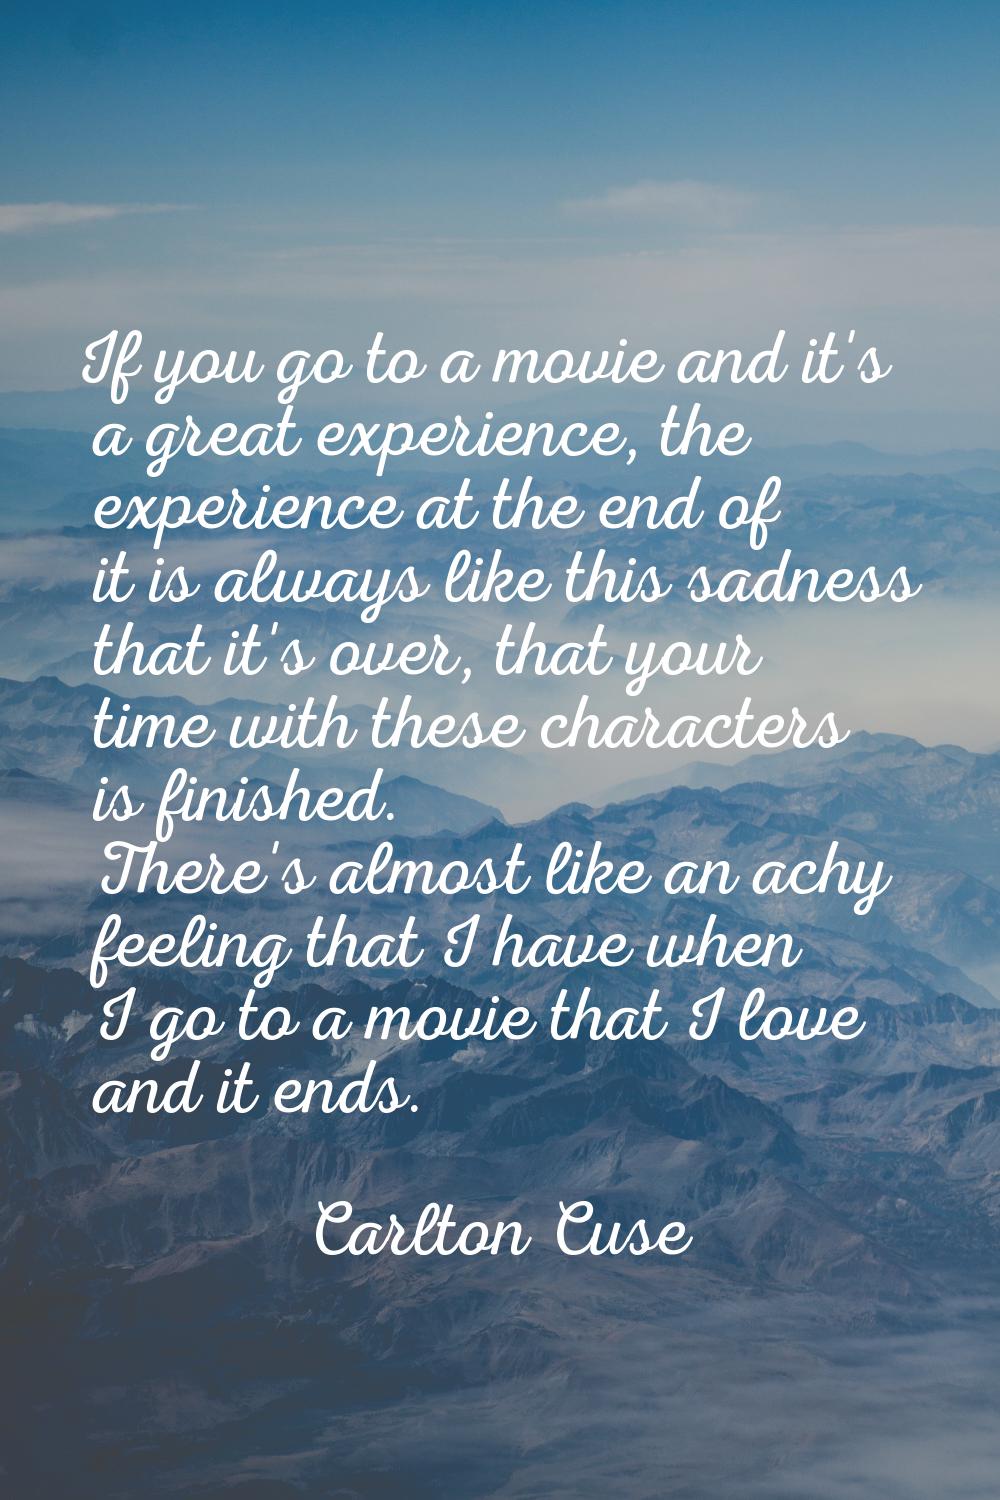 If you go to a movie and it's a great experience, the experience at the end of it is always like th